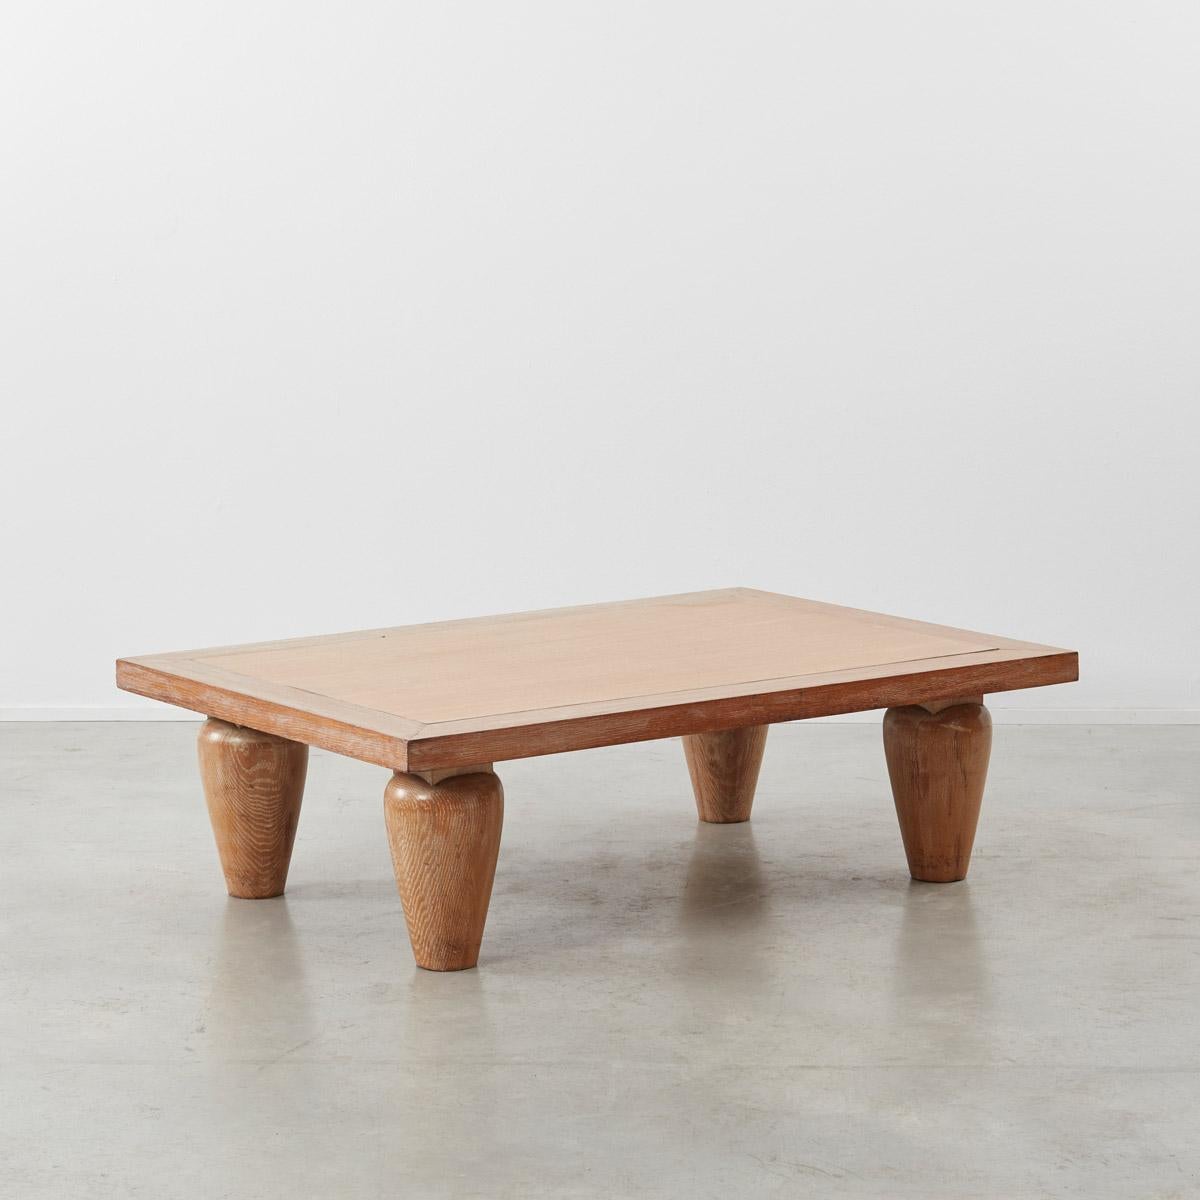 Charming early 20th century cerused oak coffee table in the manner of architect Josef Frank. Whilst this coffee table is unattributed it certainly sings the tune of Frank’s design sensibilities and aesthetic.

The rectangular form is modest in